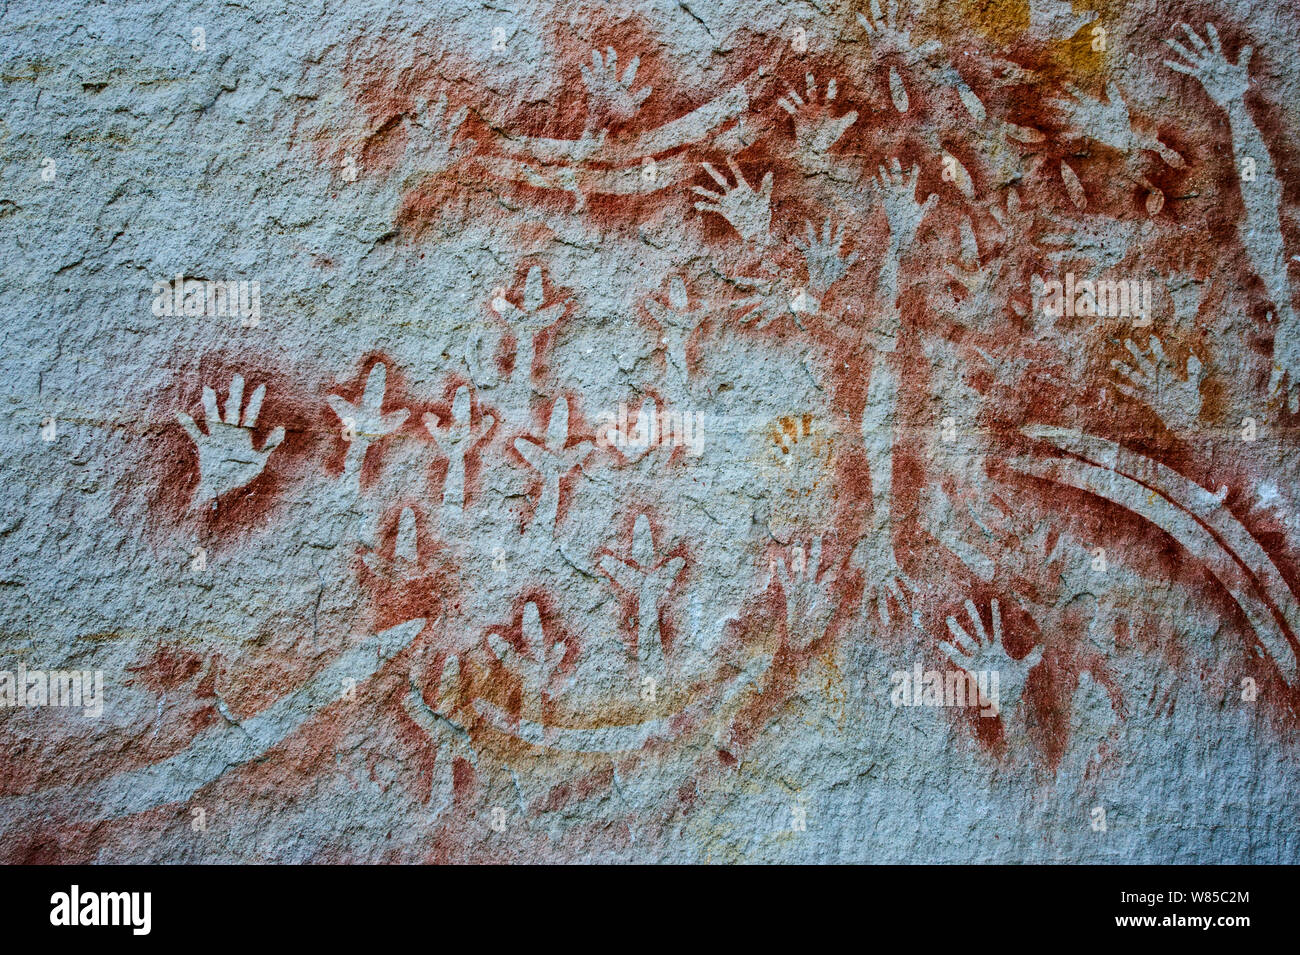 Aboriginal rock art at the 'Art Gallery' in Carnarvon Gorge, Queensland. Stencil art measured to be 2000 years old shows depictions of hands boomerangs Rock Wallaby bones and Emu feet. Stock Photo